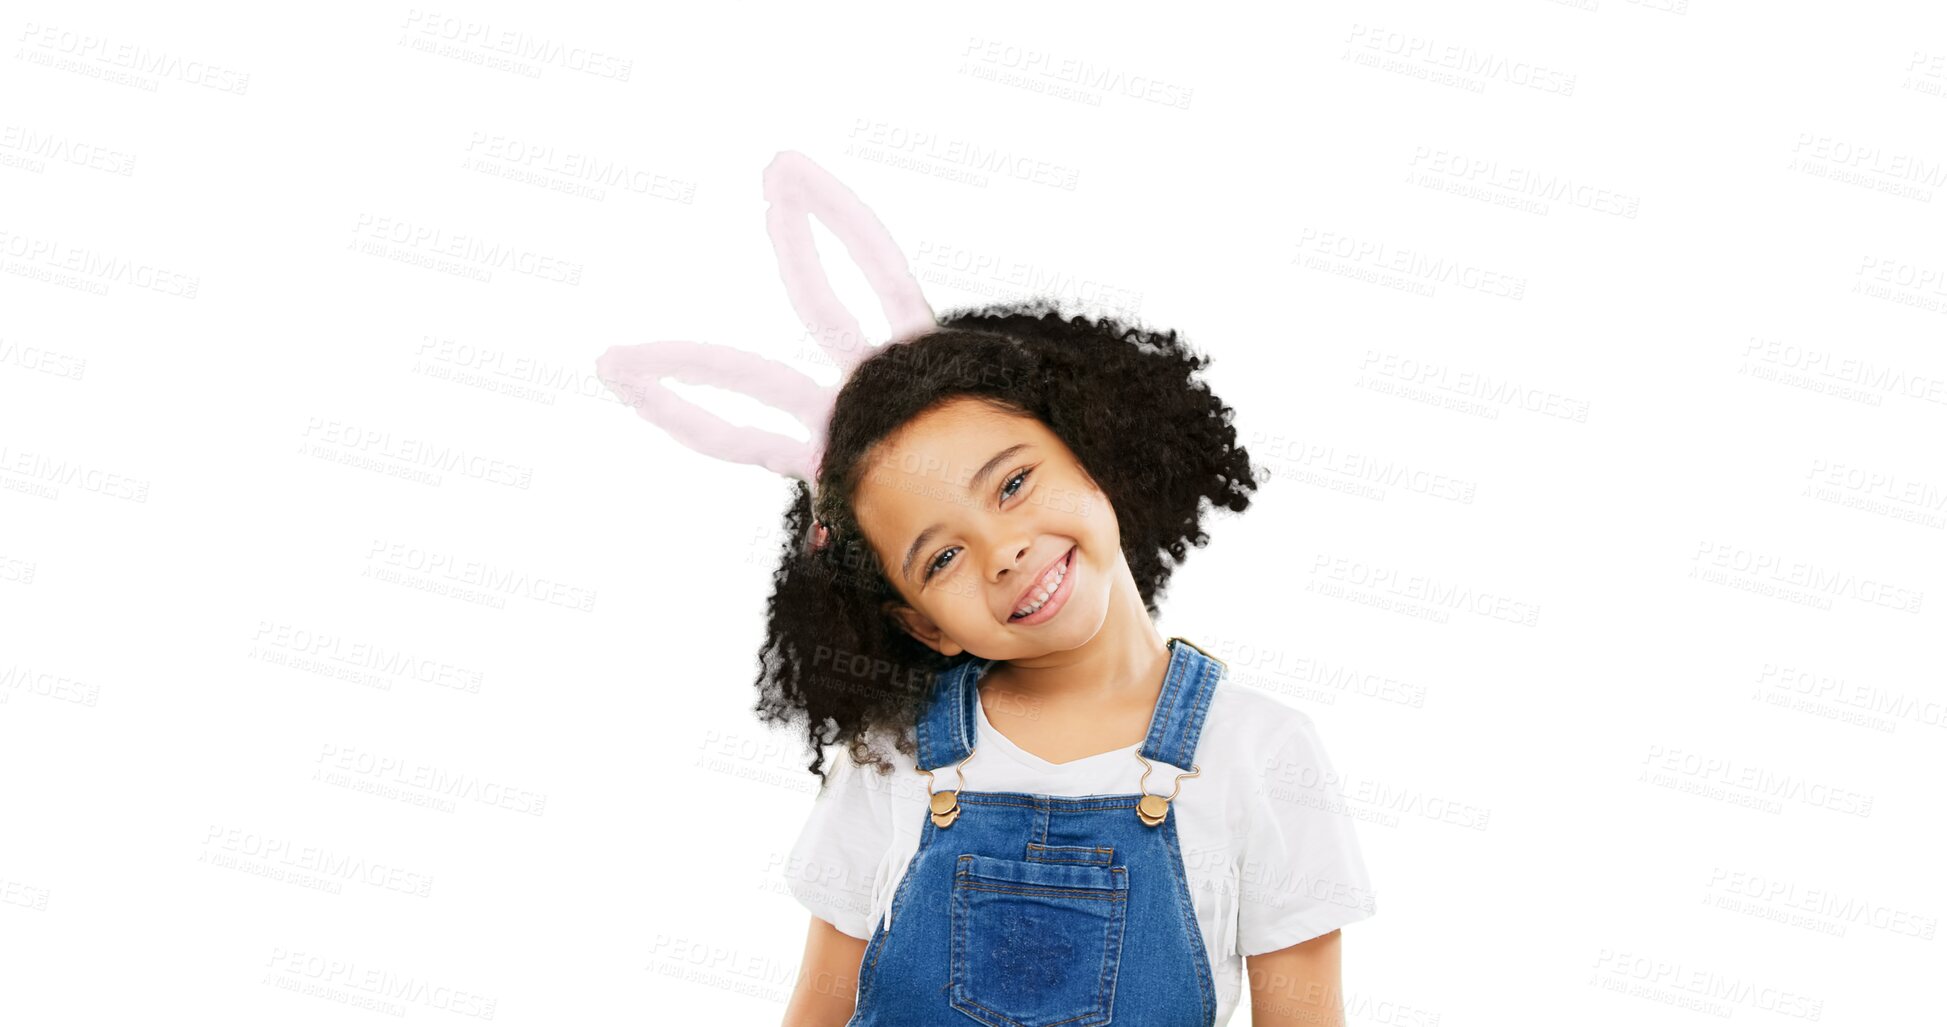 Buy stock photo Easter, happy and face of a child with bunny ears isolated on png or transparent background. Cute, happiness and portrait of an adorable little girl smiling, looking cheerful and playful with smile